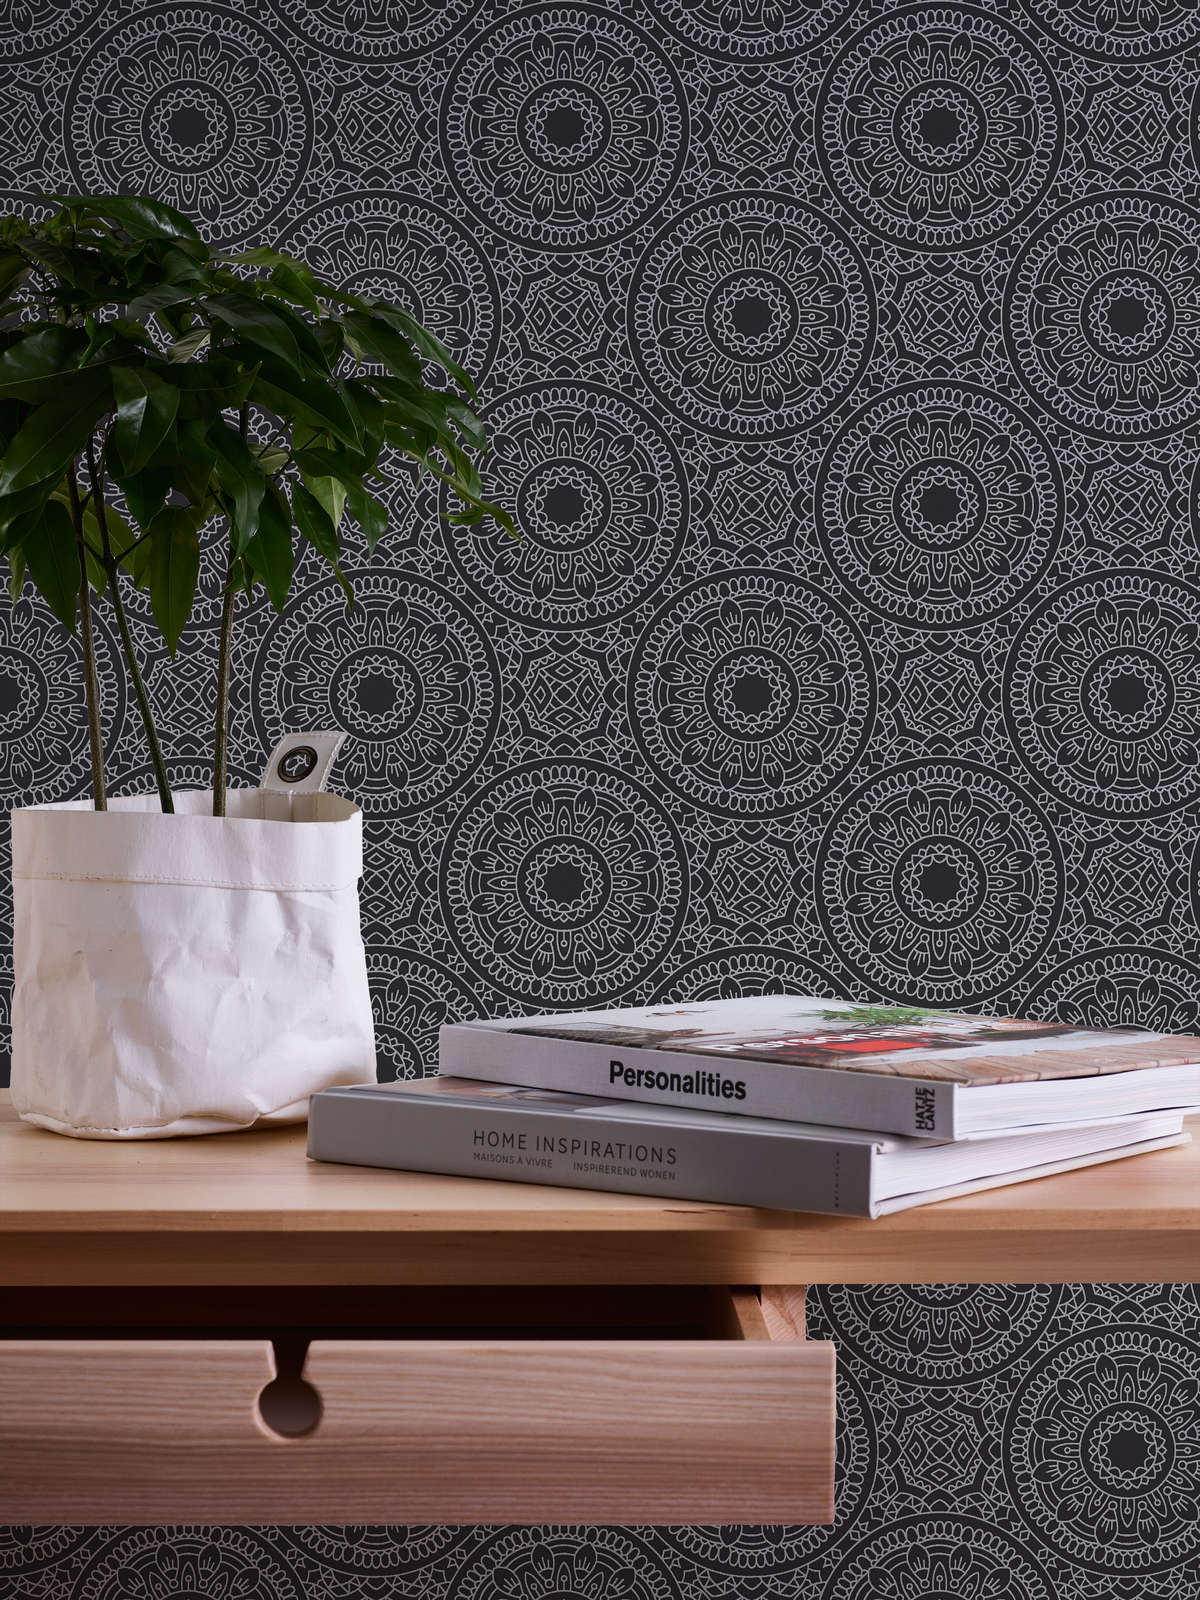             Graphic wallpaper with circle pattern glossy smooth - black, silver
        